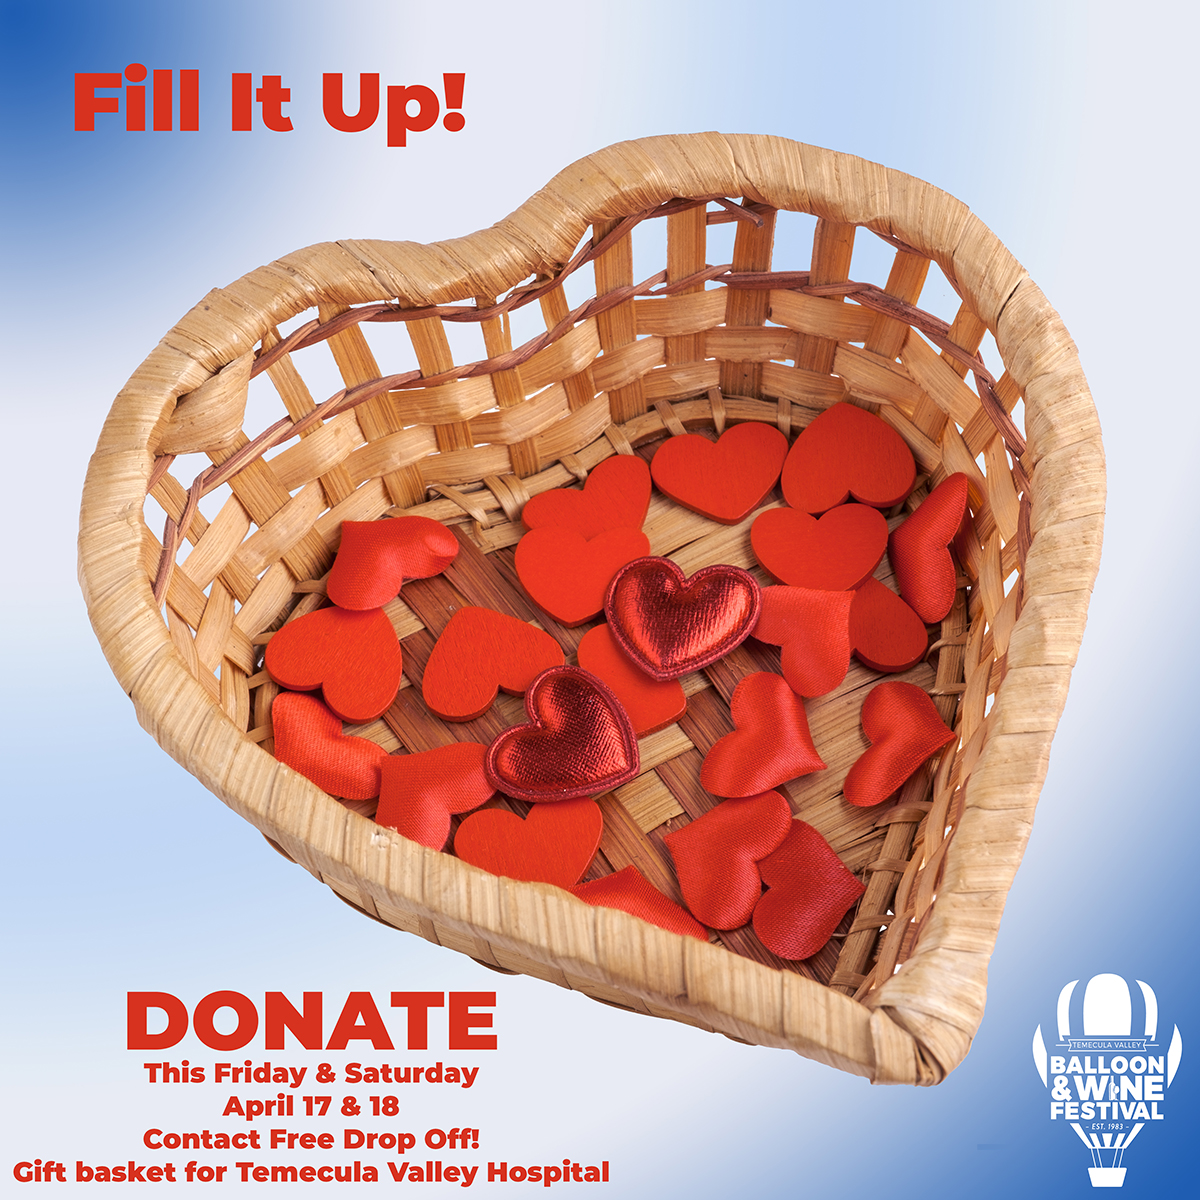 Contact-Free Drive-Up, Drop-Off – DONATE 4/17-4/18, Fri., Sat., 11 am-1 p.m. 41755 Rider Way, Temecula. We are filling up giant gift baskets 4 Temecula Valley Hospital, & other frontline area frontline workers. accepting masks, gloves, sanitizers, etc.